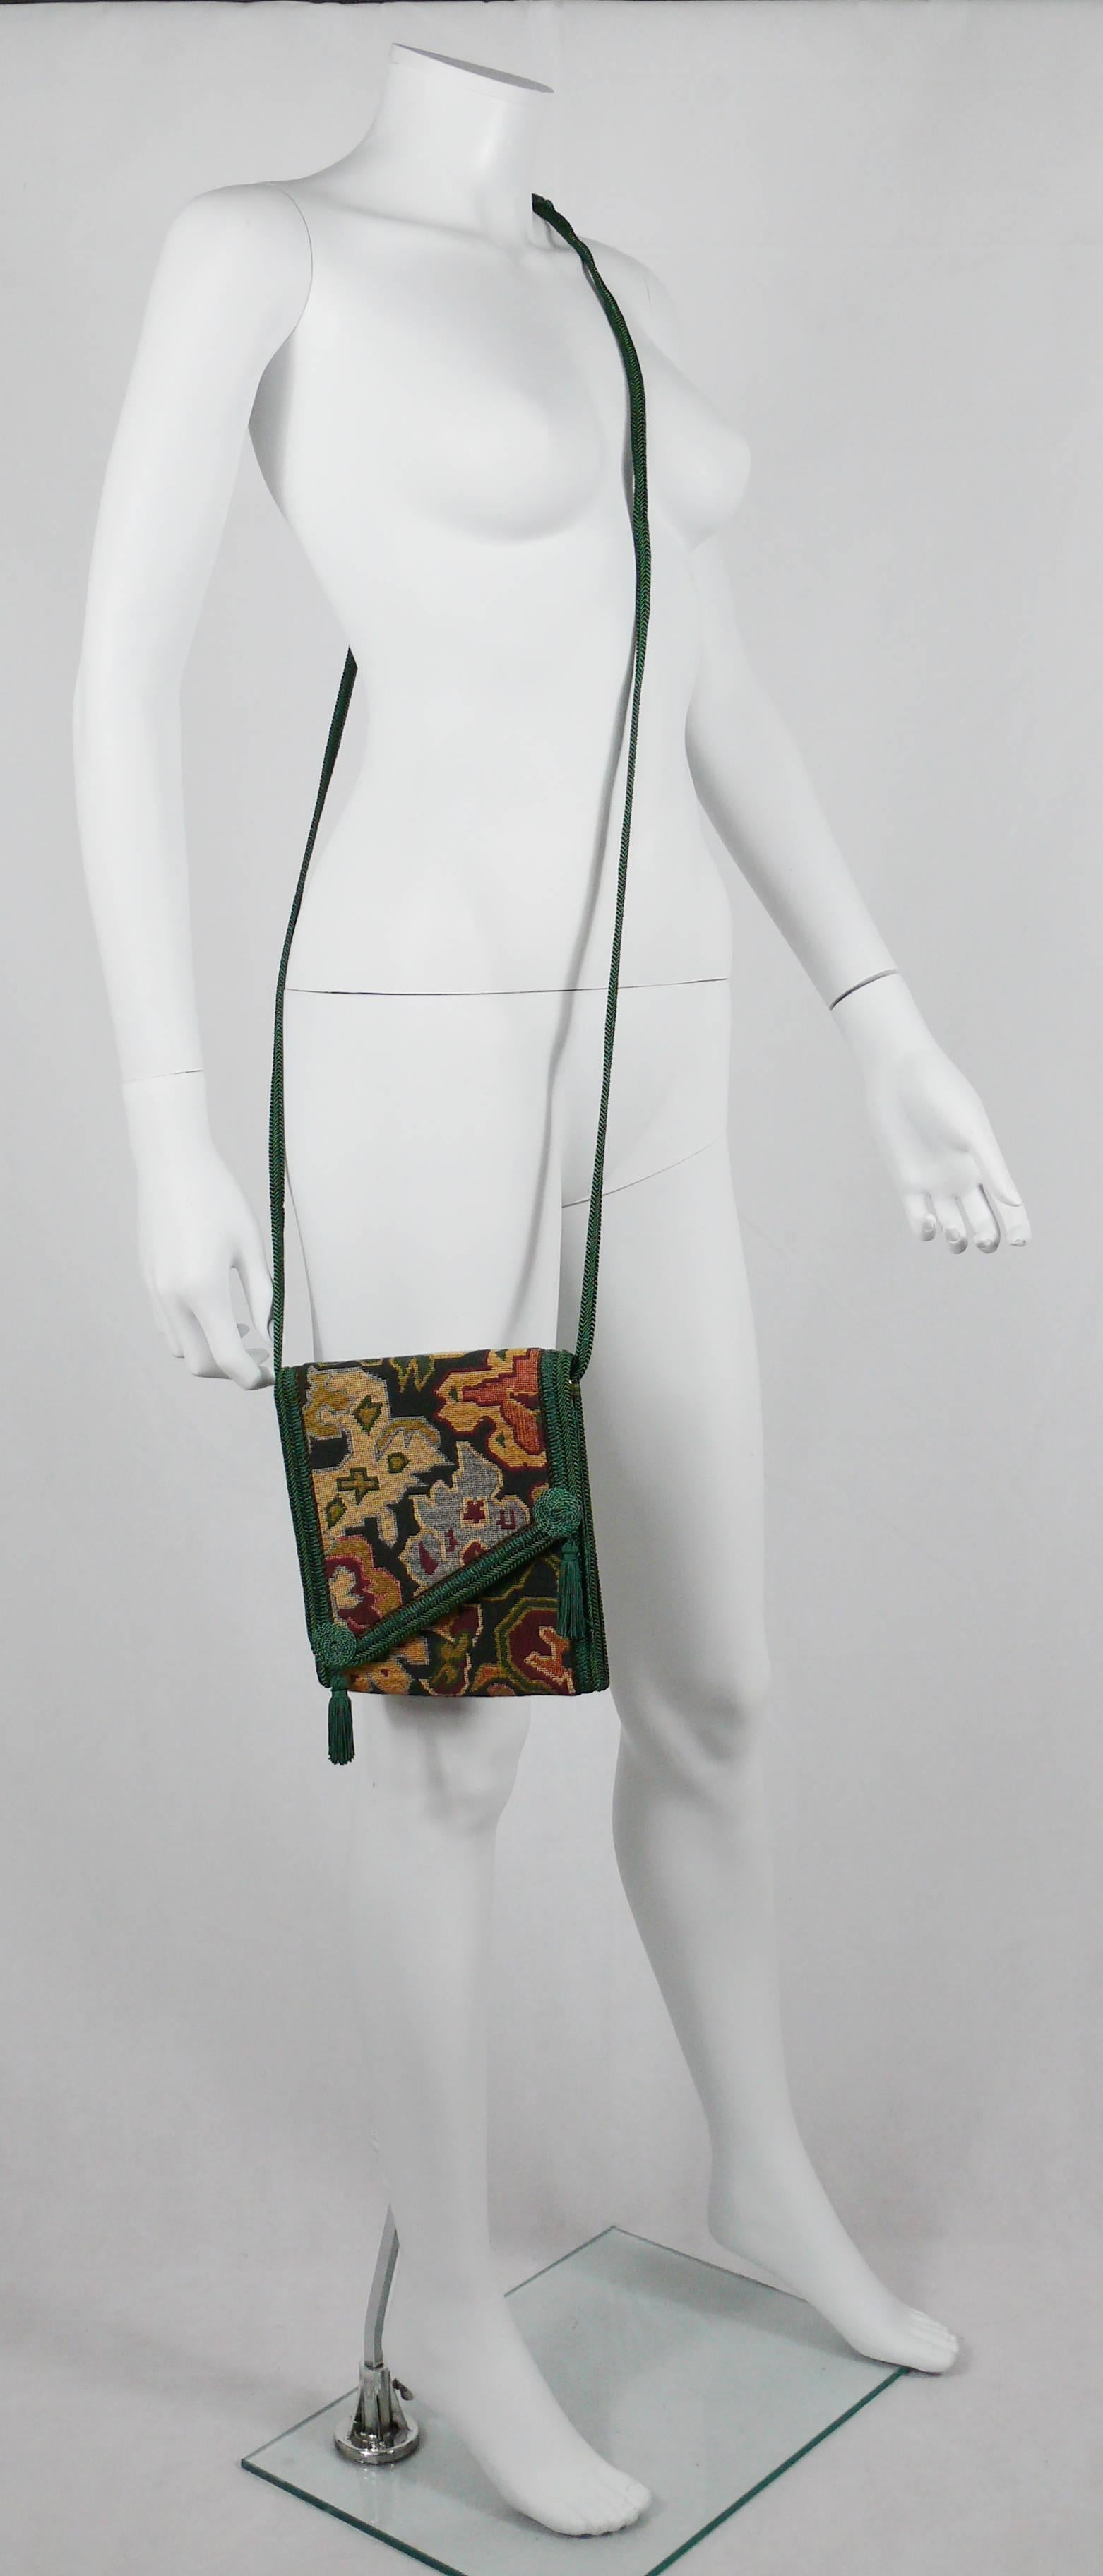 CHRISTIAN DIOR vintage cross body messenger bag featuring a kilim tapestry design, braided green silk strap and tassels.

Black leather lining.

Marked CHRISTIAN DIOR Made in France.

Indicative measurements : total length (incl. strap) approx. 95